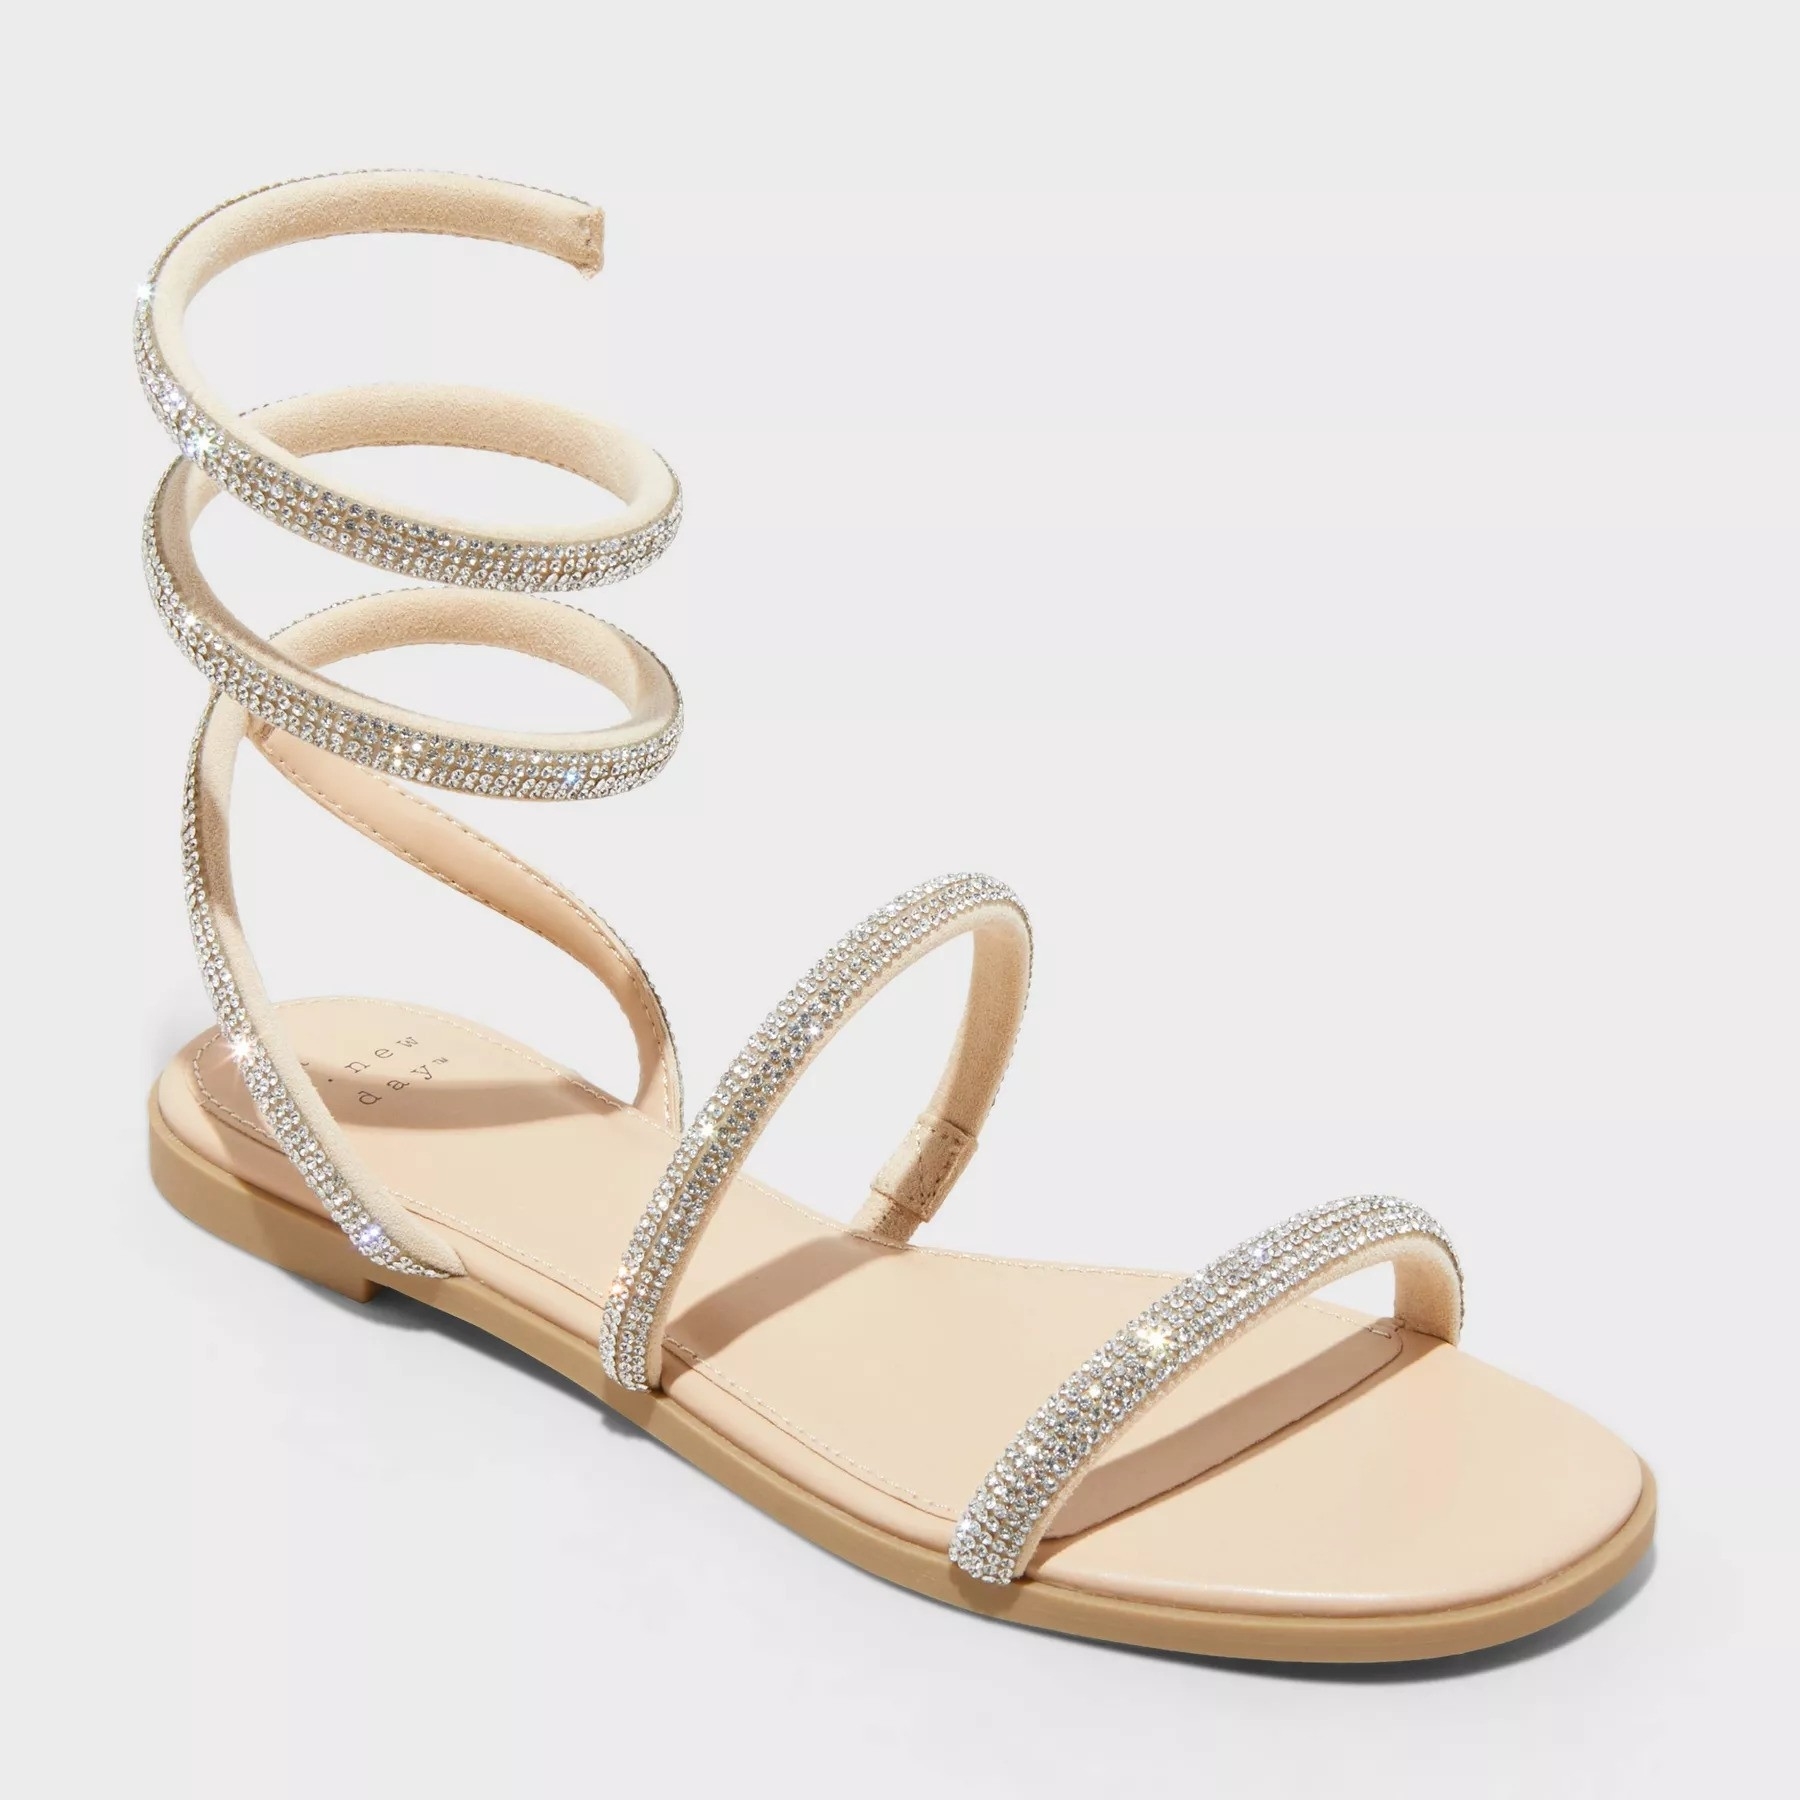 Gladiator-style flat sandal with spiral ankle straps and rhinestone embellishments